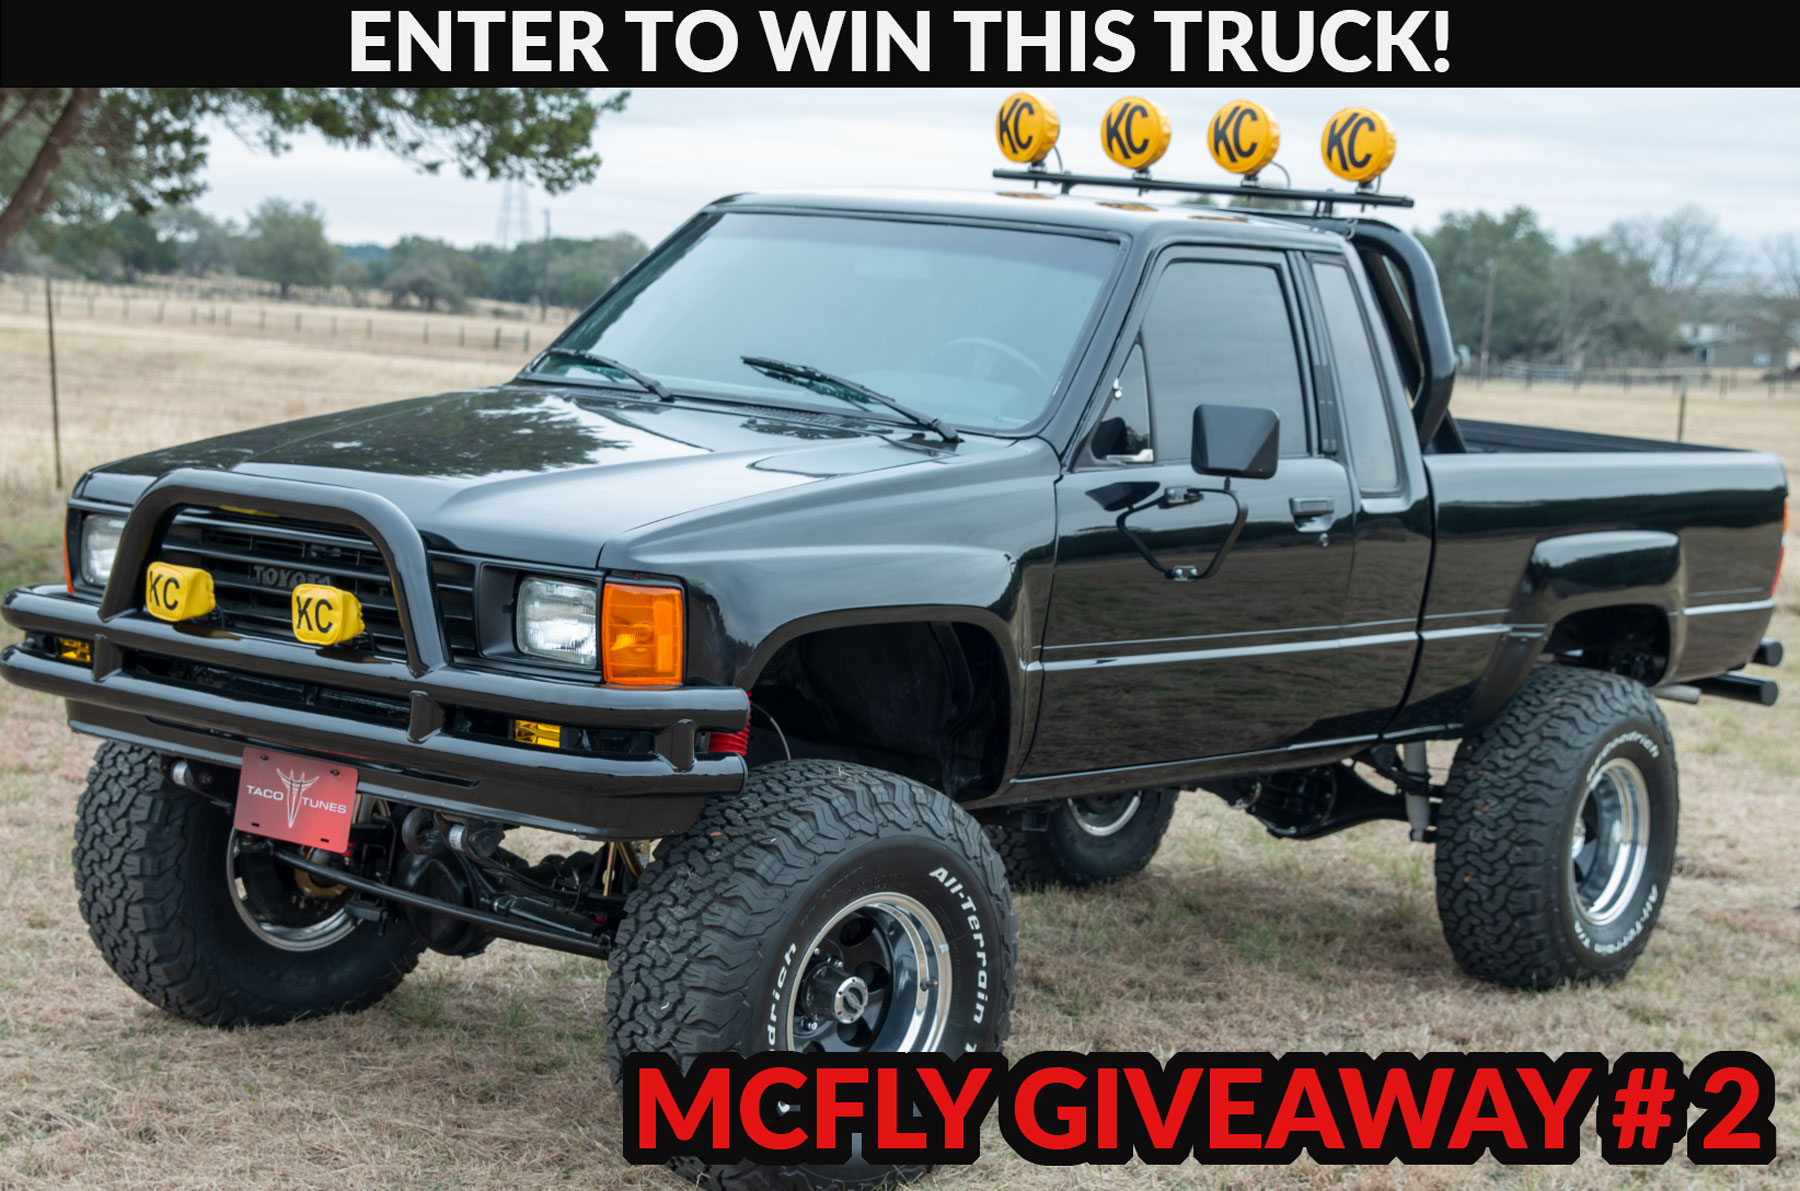 McFly Giveaway # 2 - Enter to Win